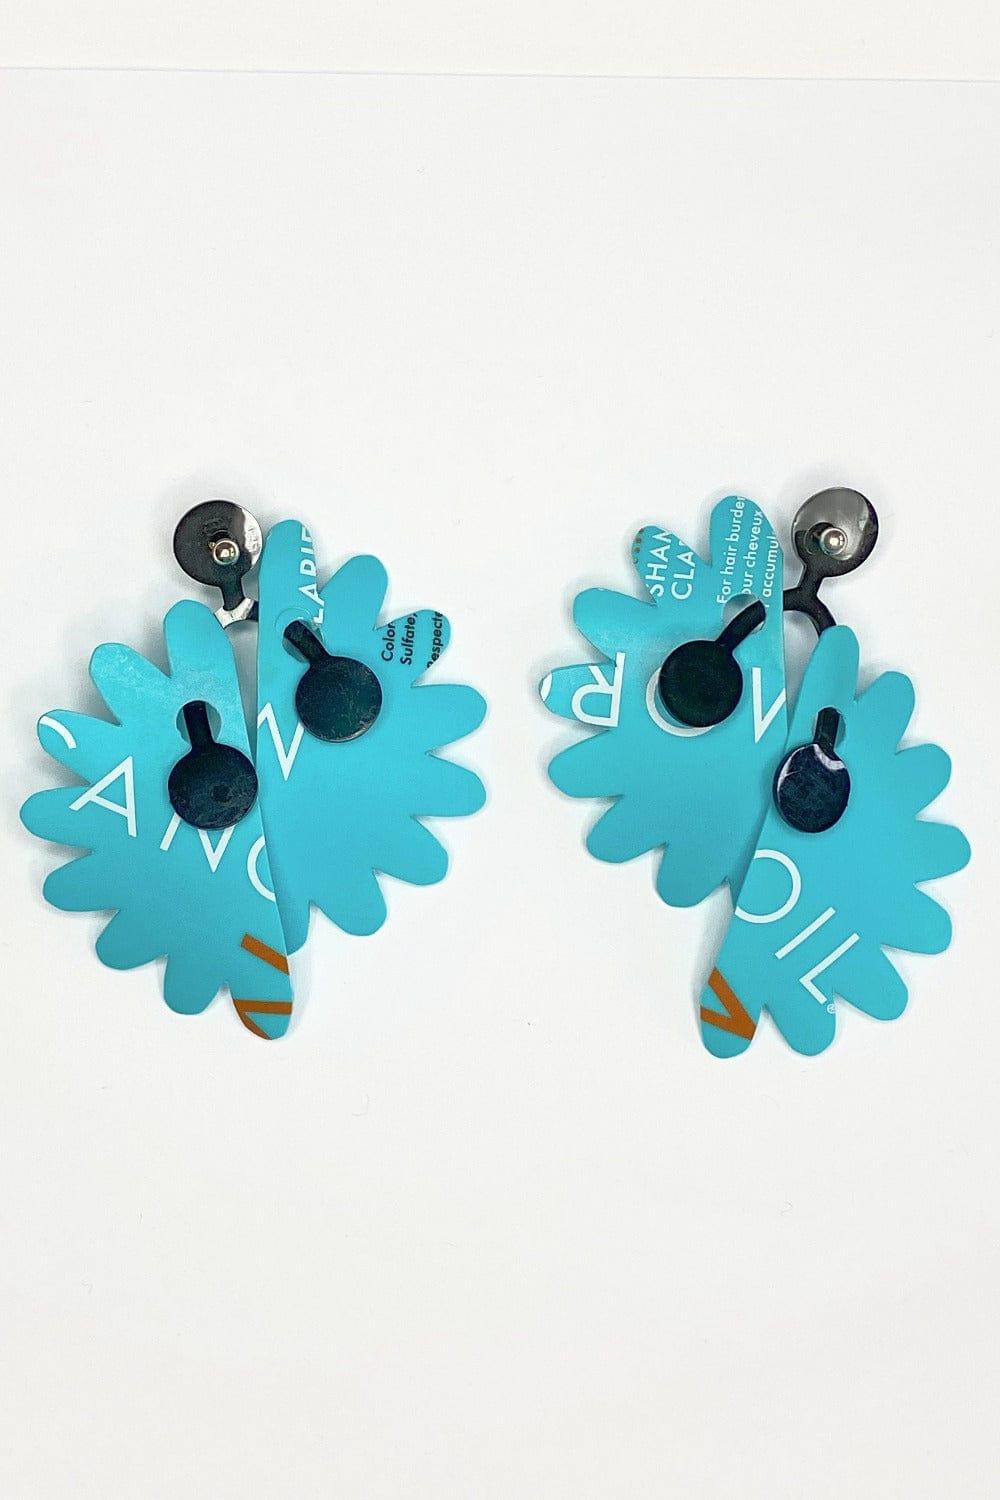 Recycled Plastic Earrings cut in a floral shape. Aqua color with random print and black detail.